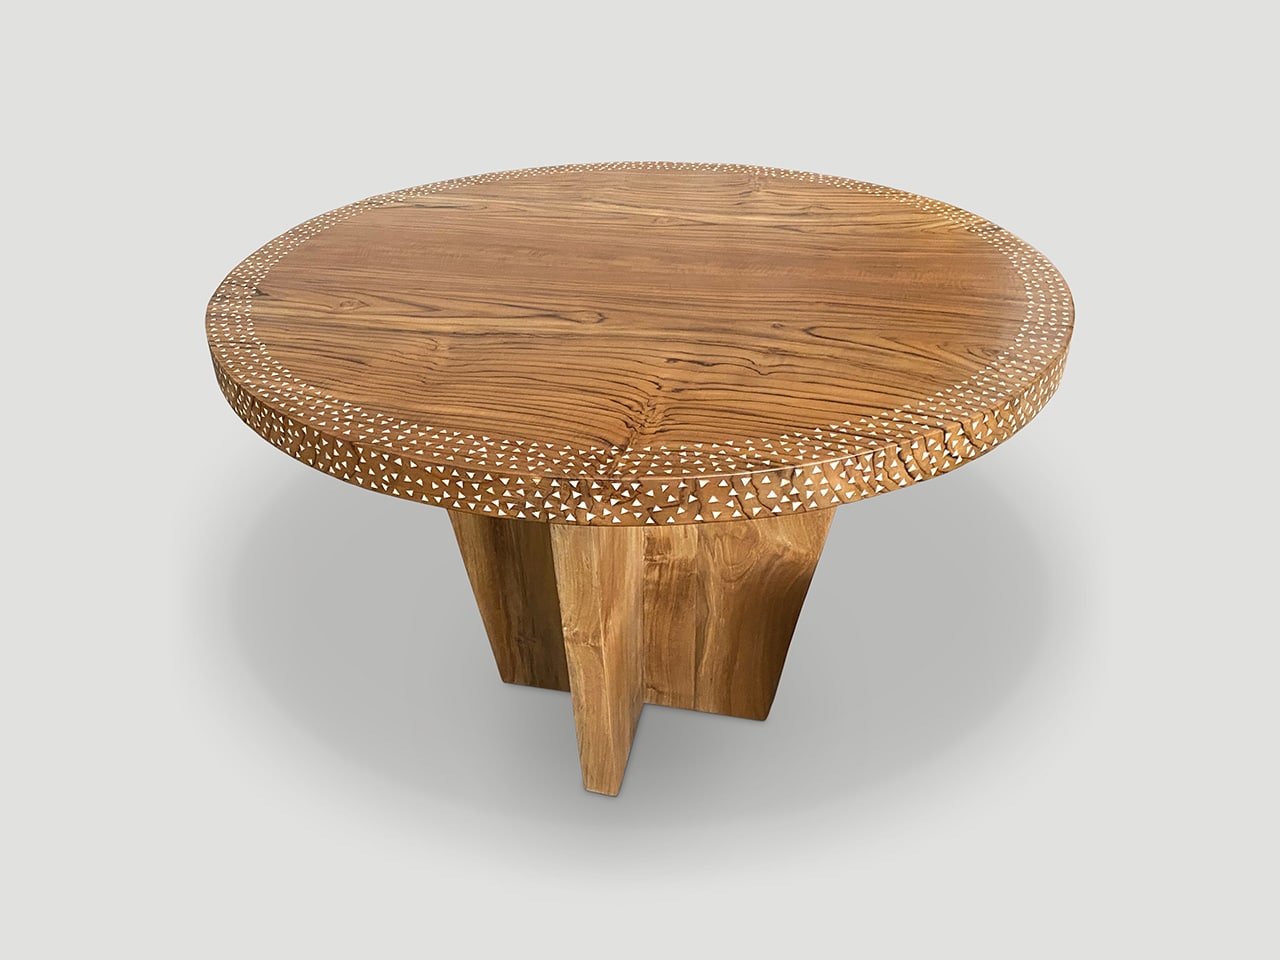 ROUND SHELL INLAID DINING TABLE OR ENTRANCE TABLE.